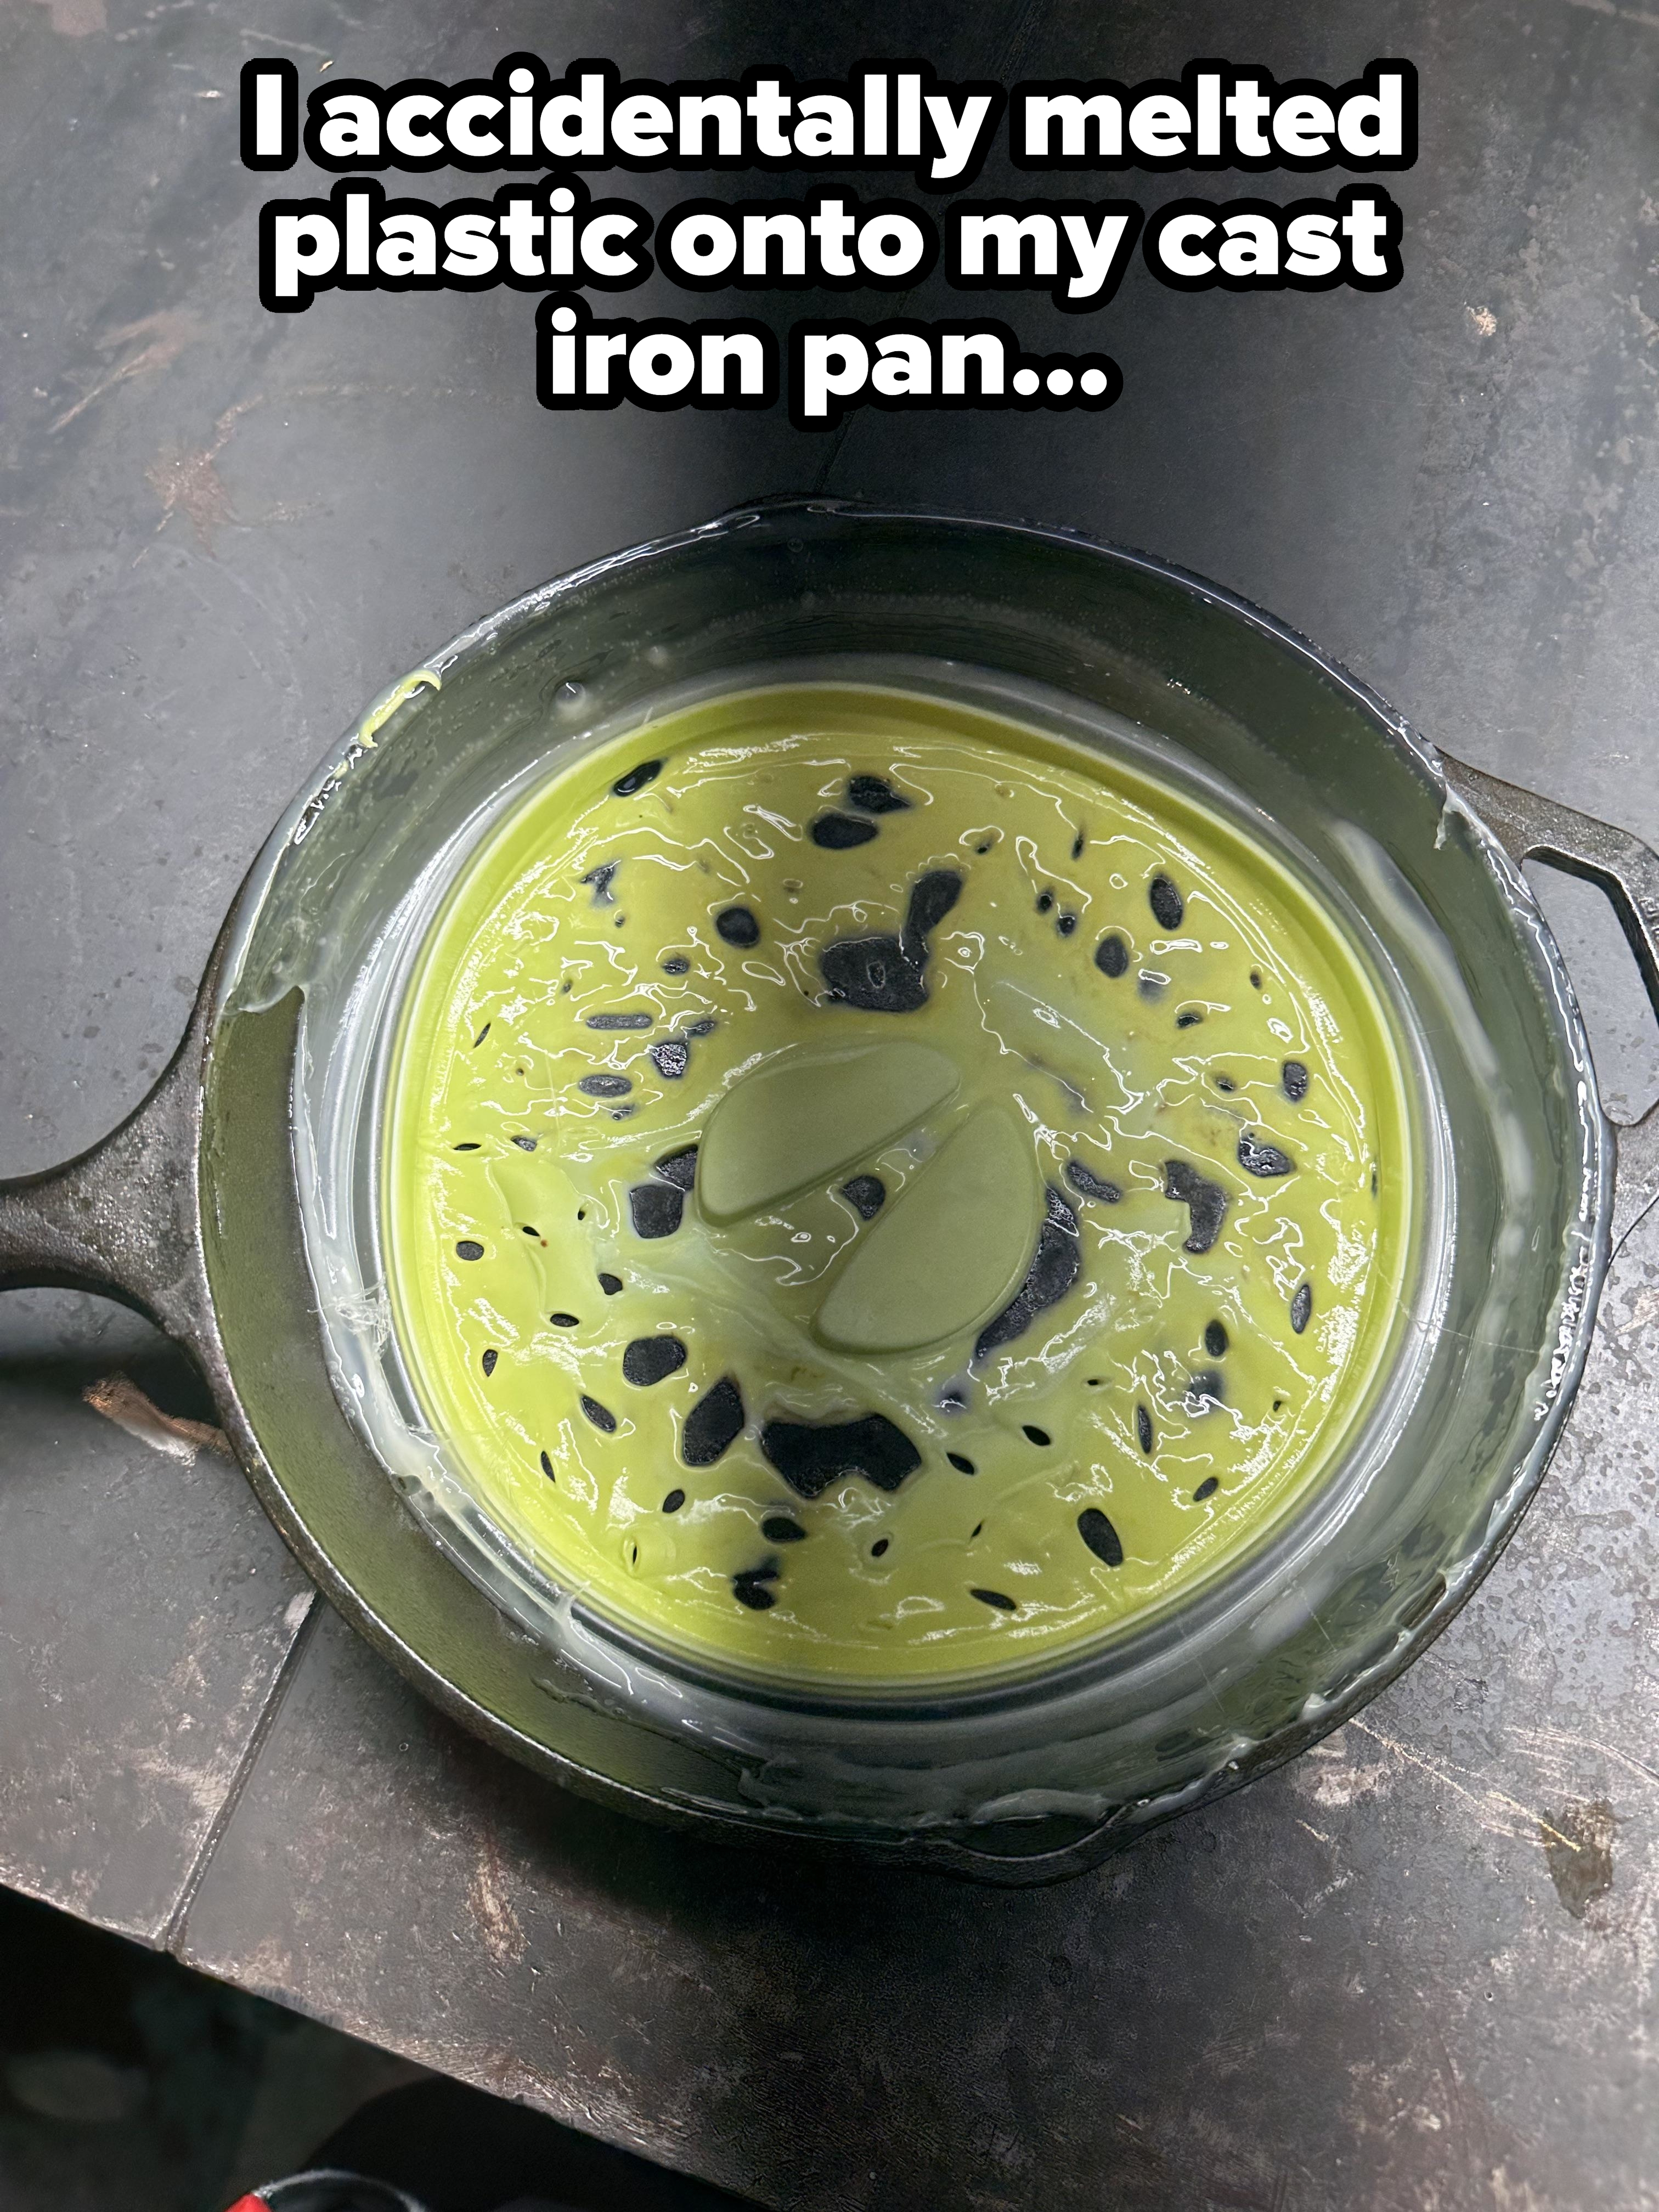 A cast-iron pan with plastic and some liquid melted into it